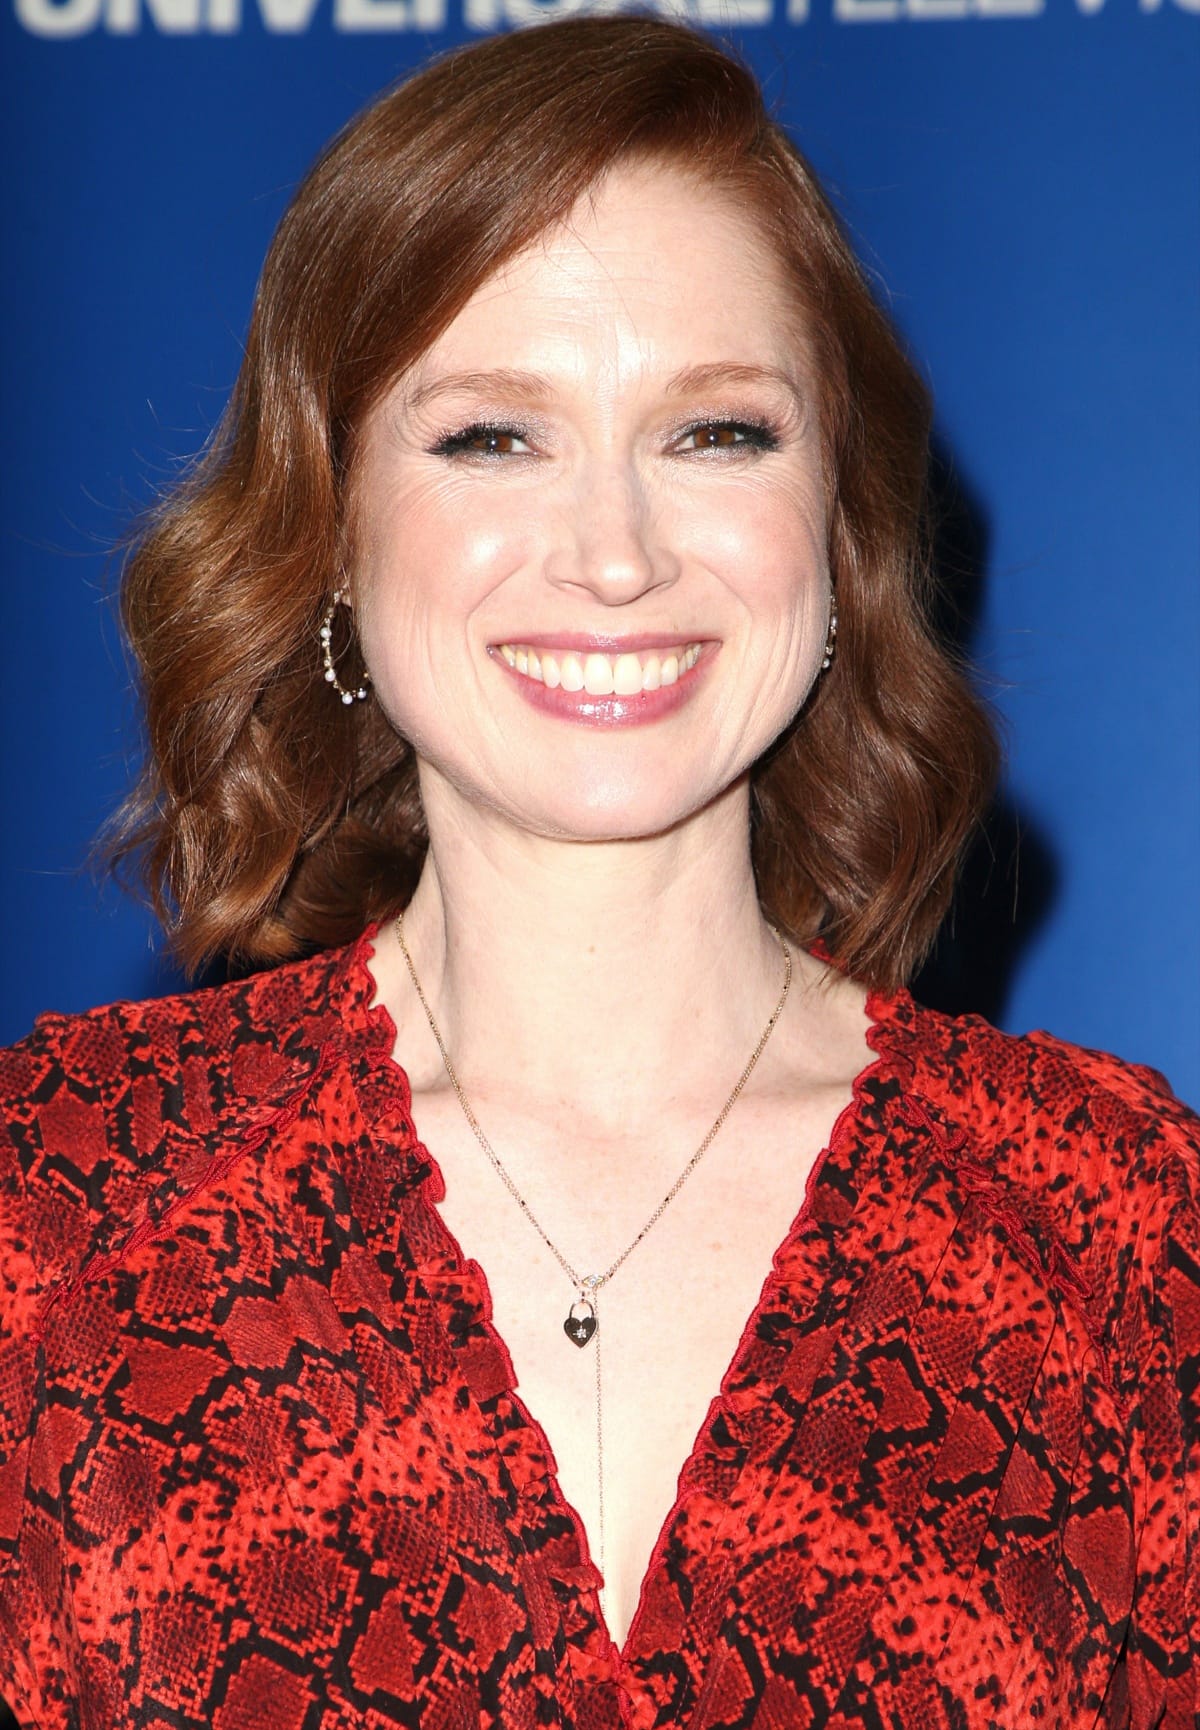 Ellie Kemper is an American actress and comedian, who is known for her roles in The Unbreakable Kimmy Schmidt, The Office, and Happiness for Beginners